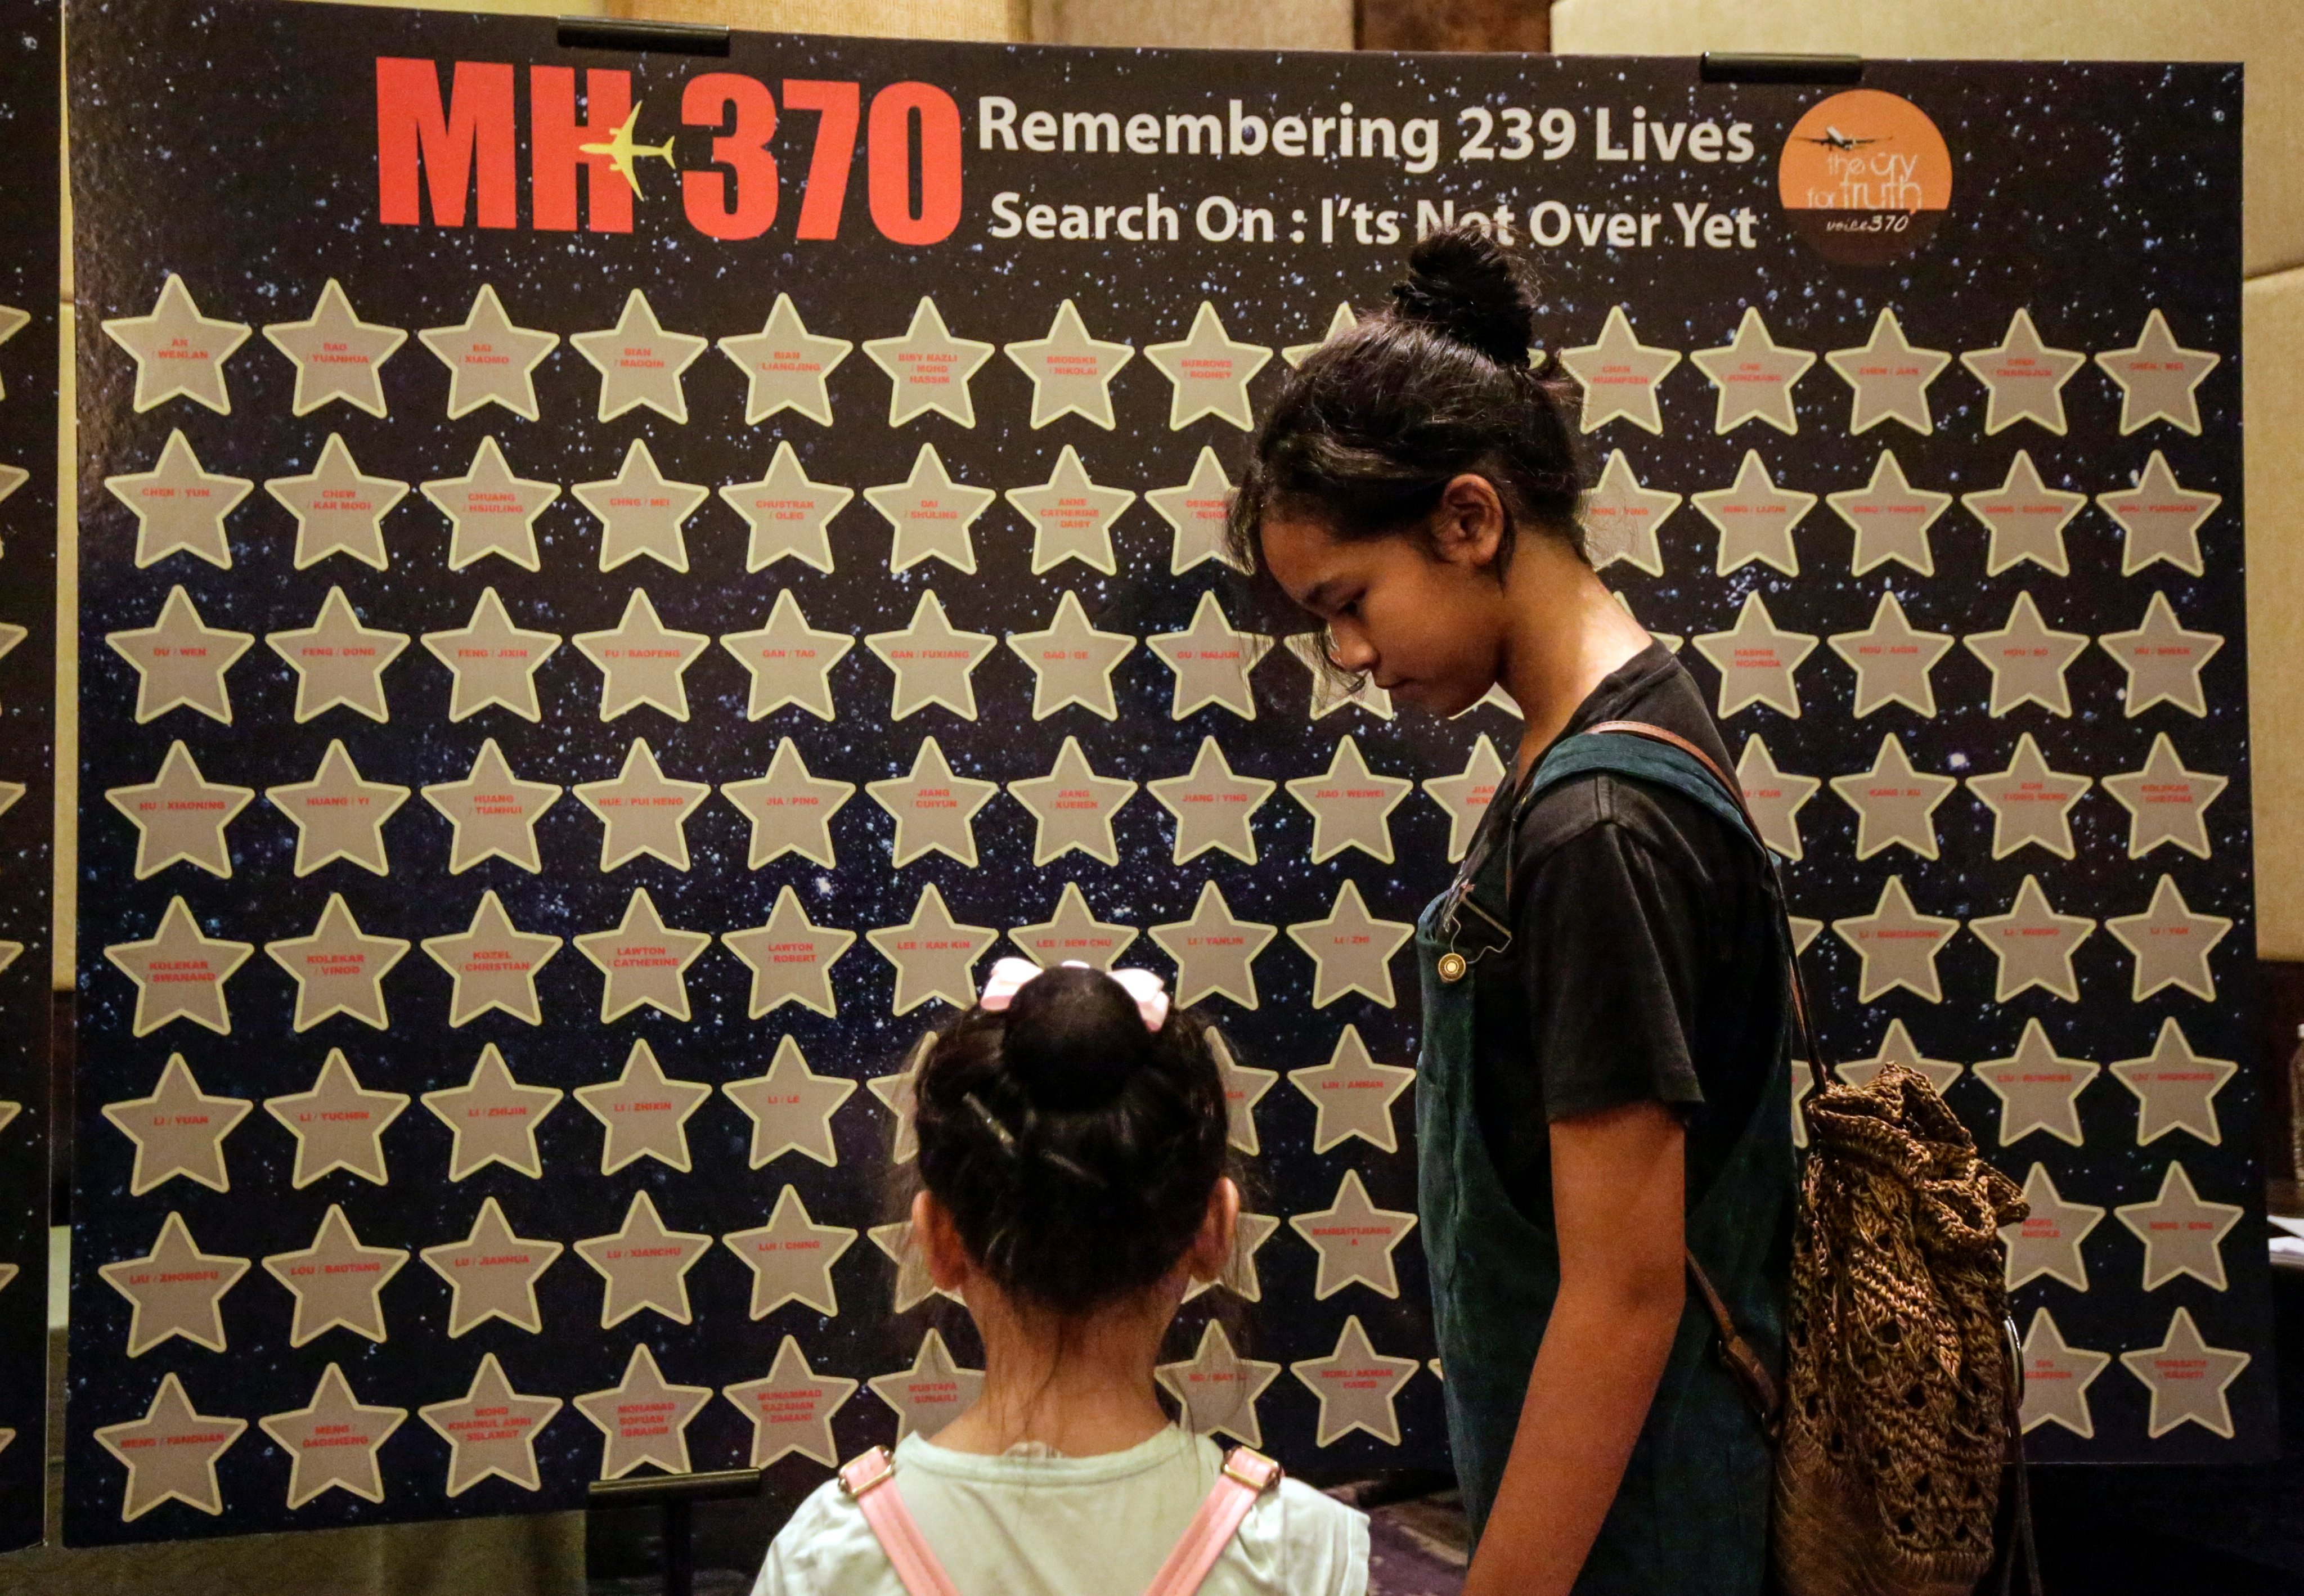 Relatives of missing MH370 passengers at a remembrance ceremony in Putrajaya, Malaysia, on March 7, 2020, to mark the sixth anniversary of the plane’s disappearance. The aircraft went missing on March 8, 2014. Photo: EPA-EFE